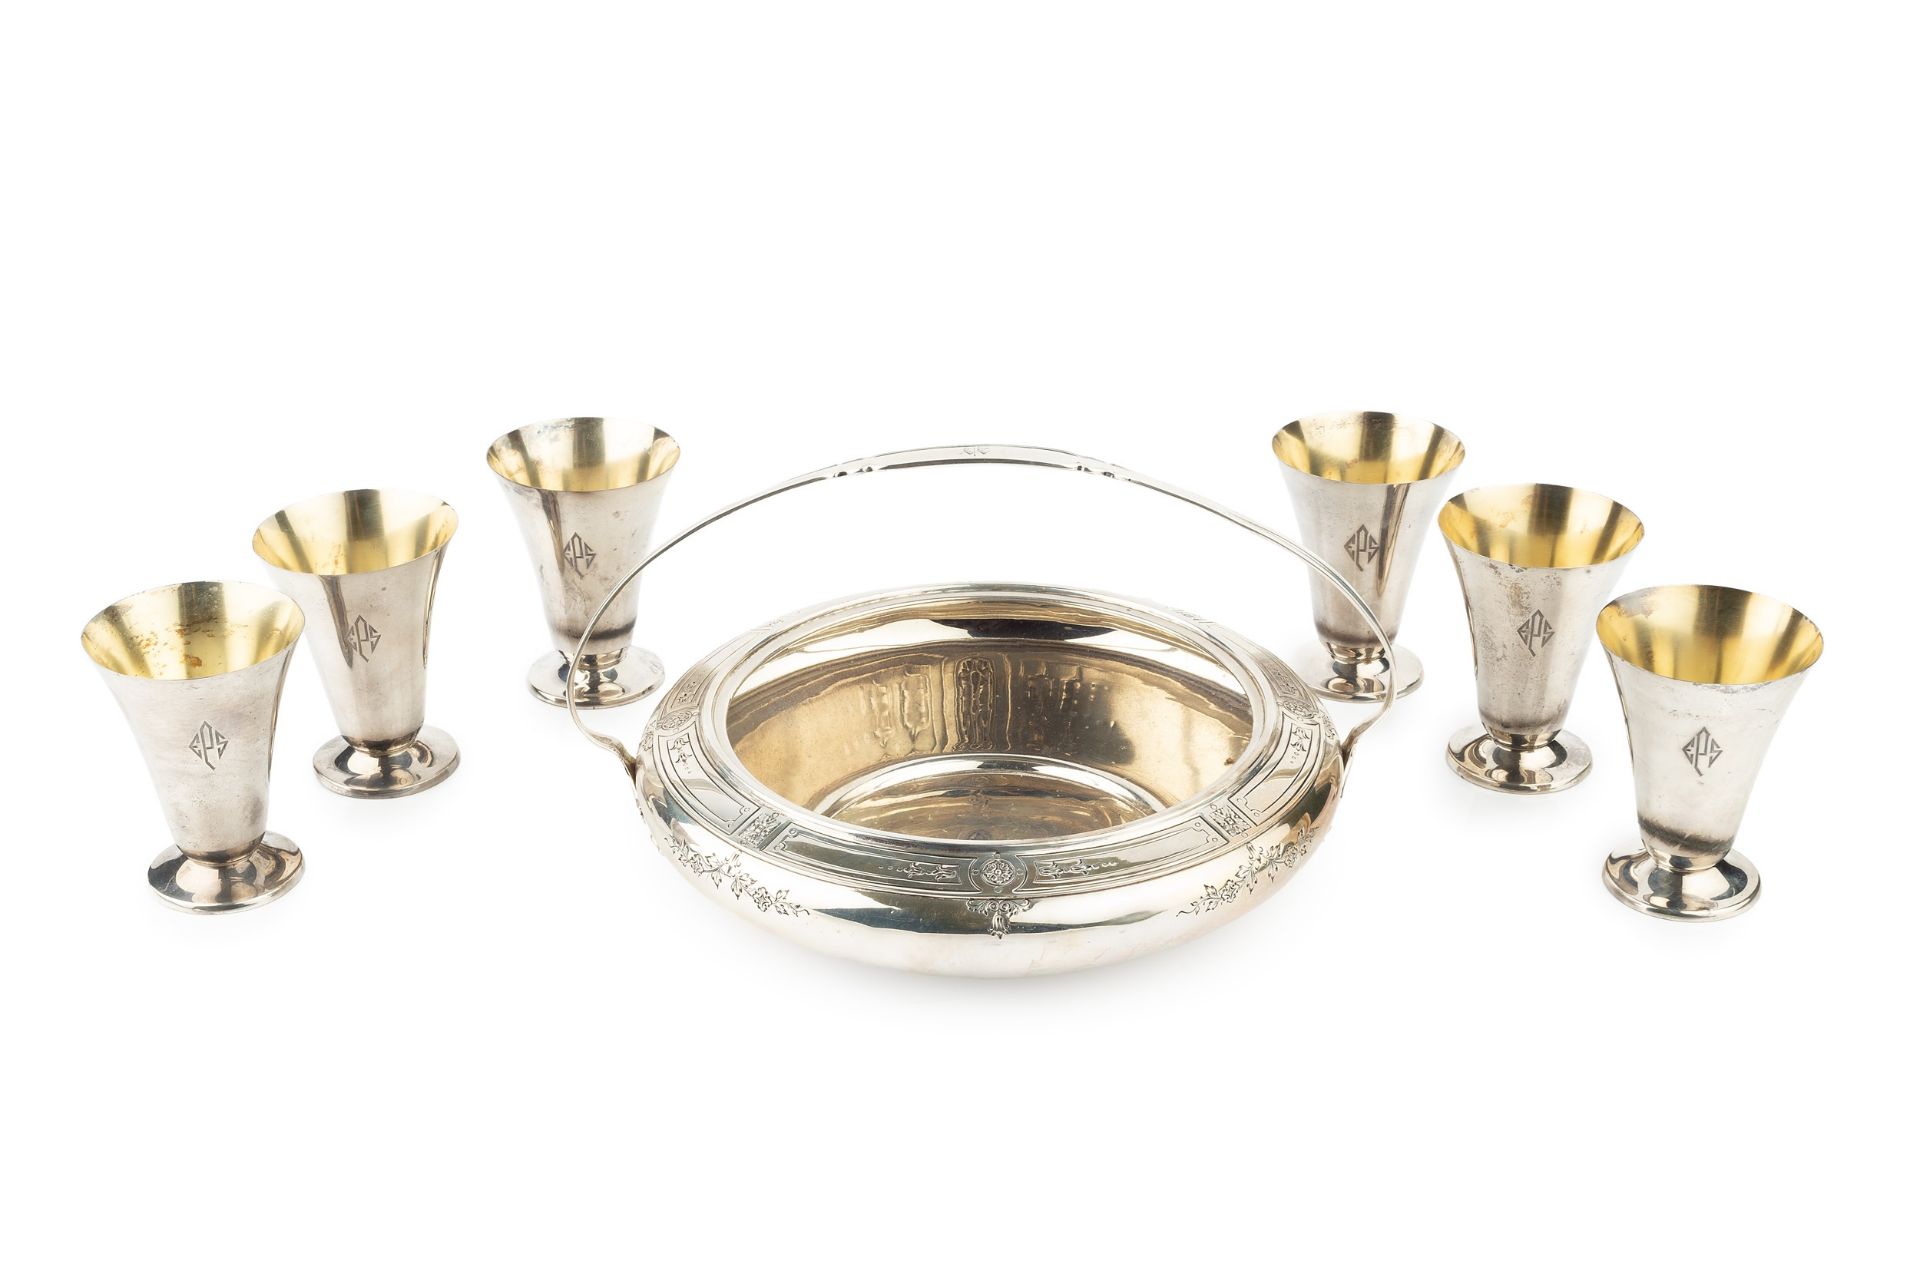 An American silver circular shallow bowl, with shaped fixed overhead handle, engraved with